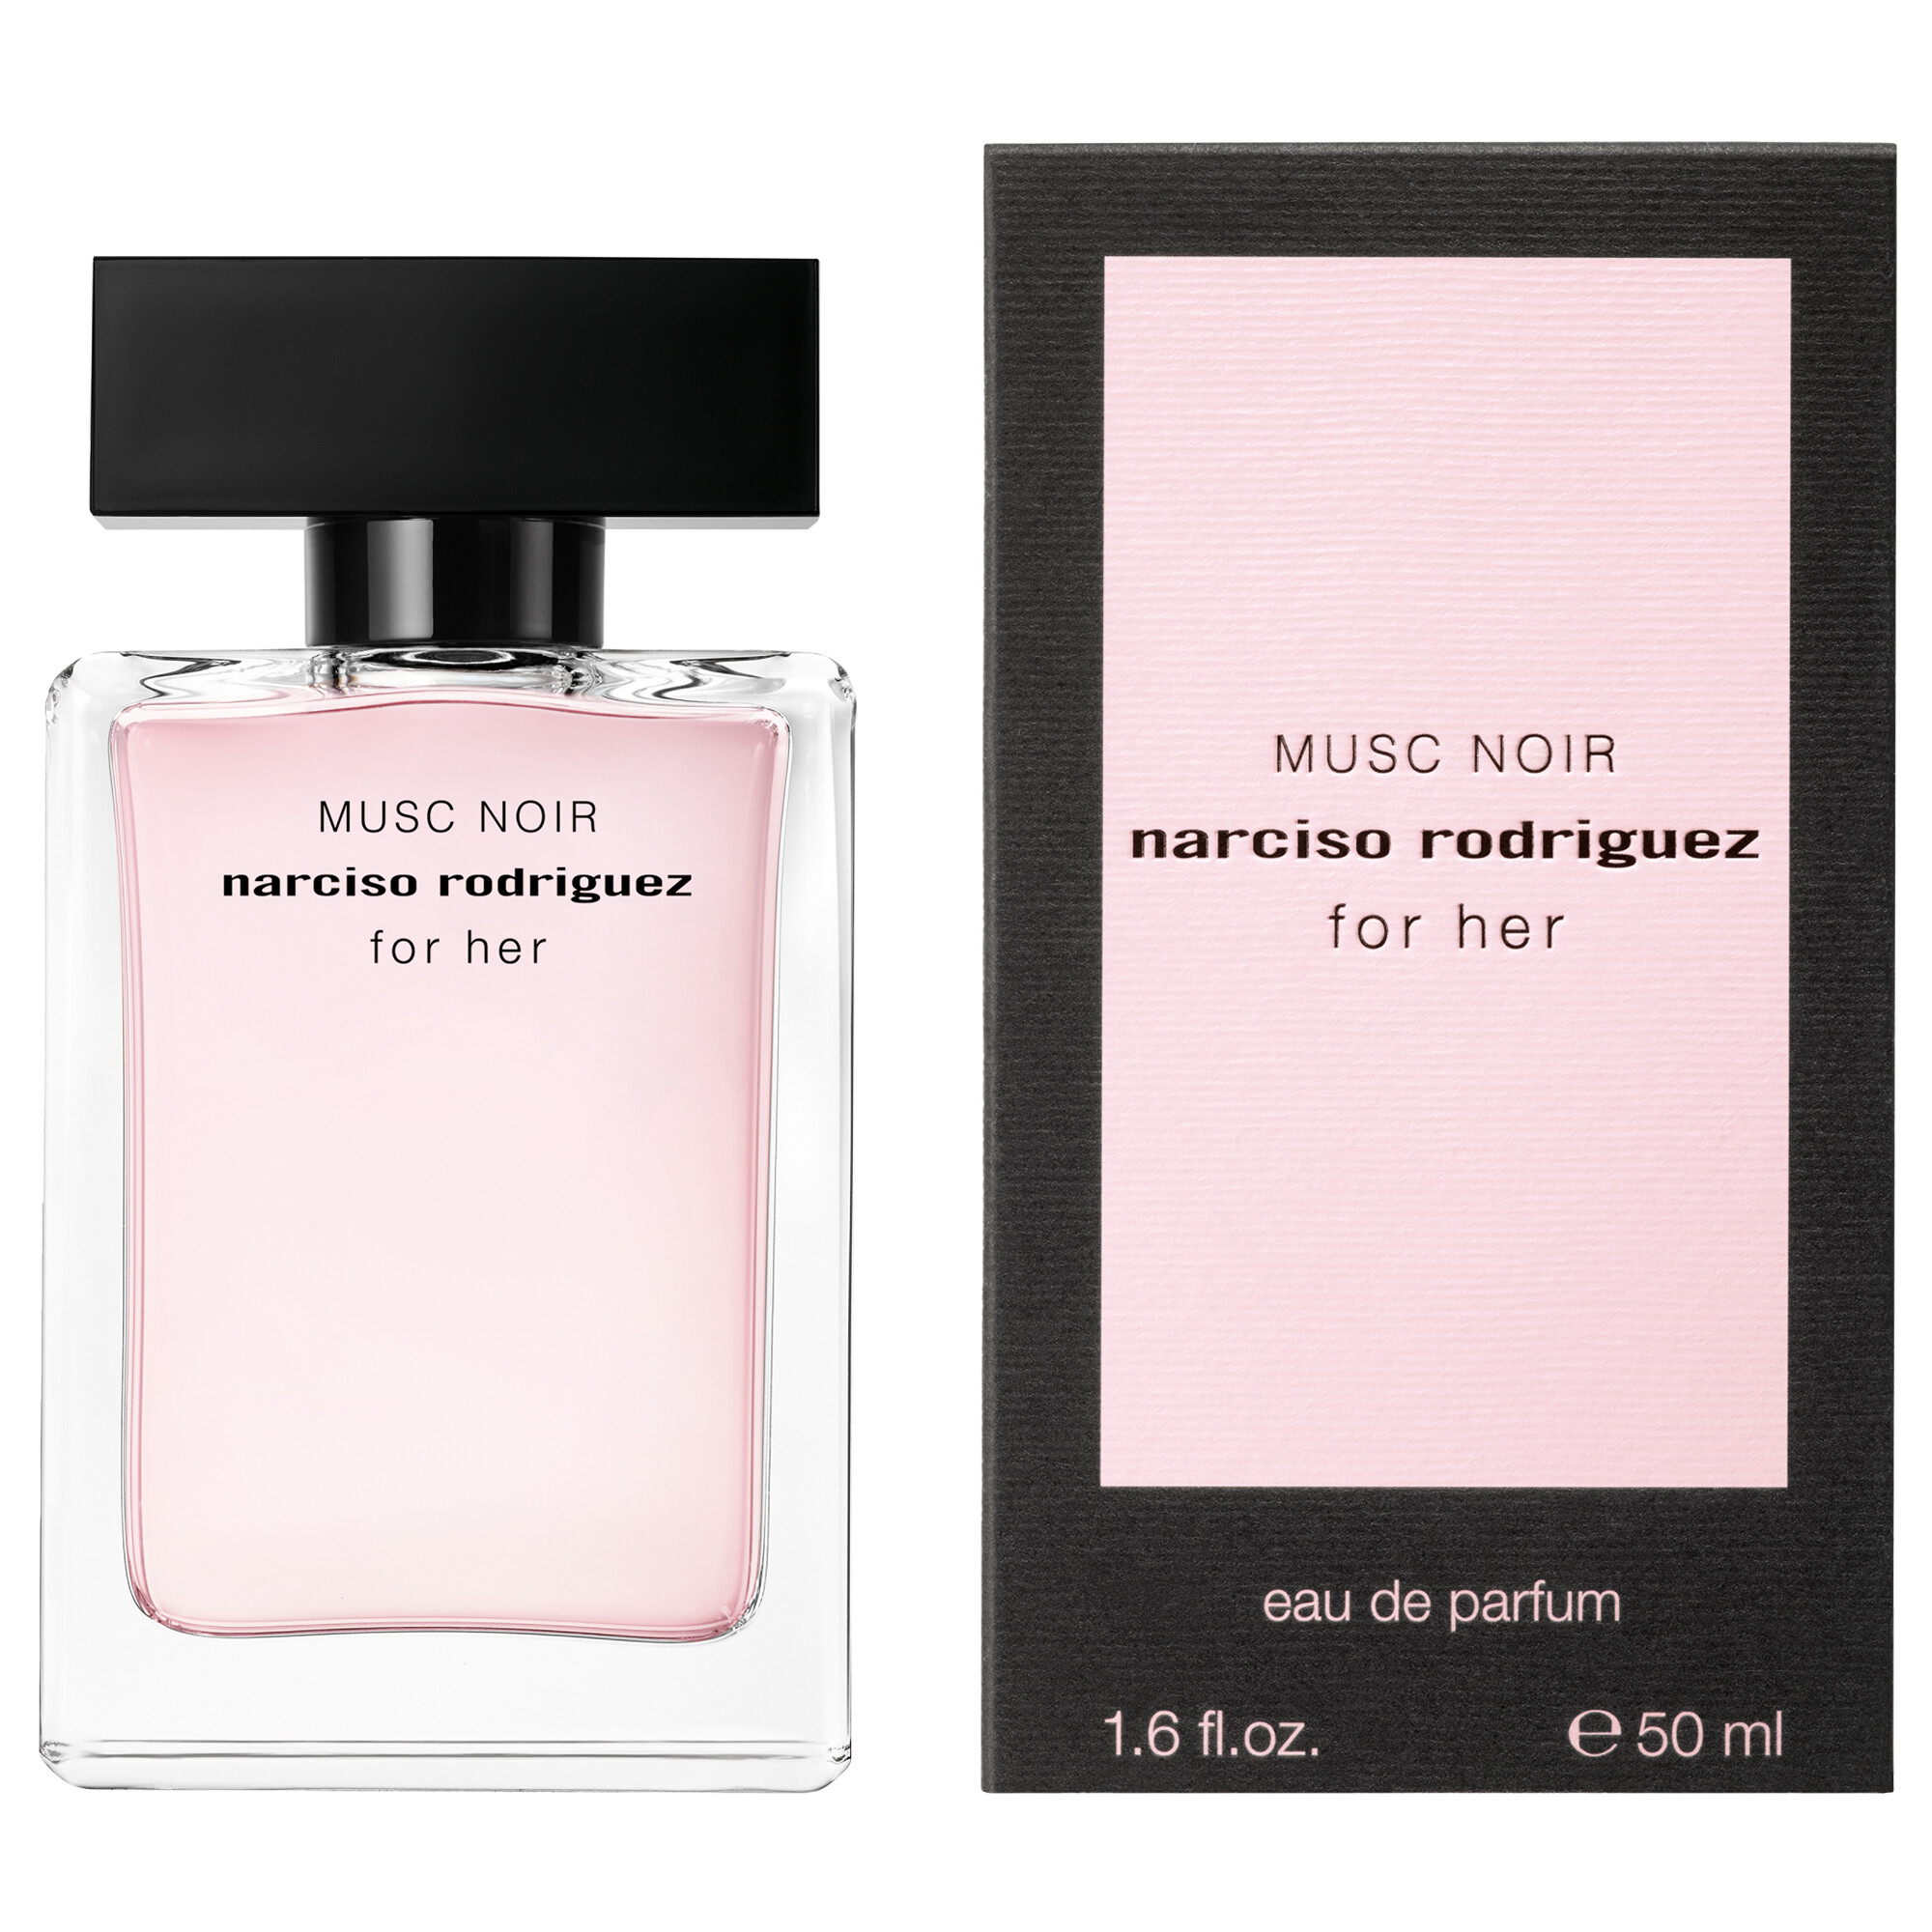 Narciso Rodriguez Narciso Rodriguez for her Musc Noir kaufen